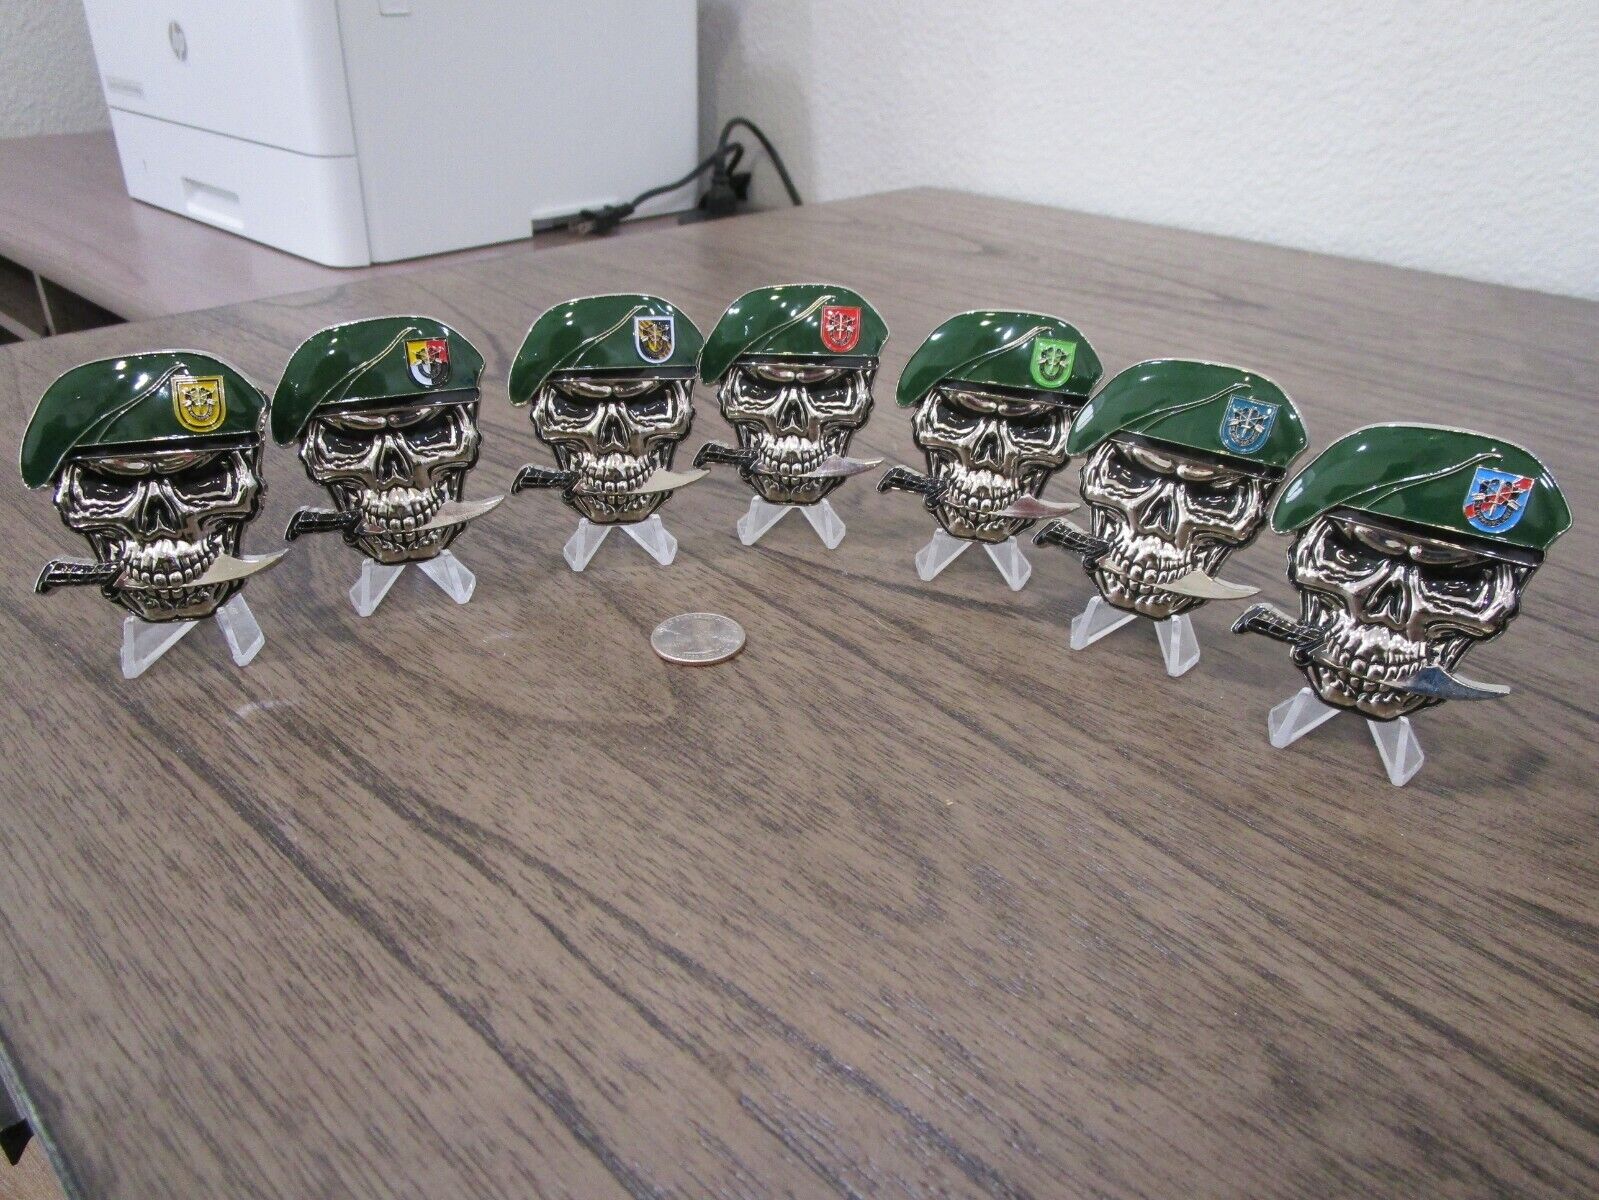 Lot of 7 SFGA Special Force Group Creed Green Berets Skull Challenge Coins